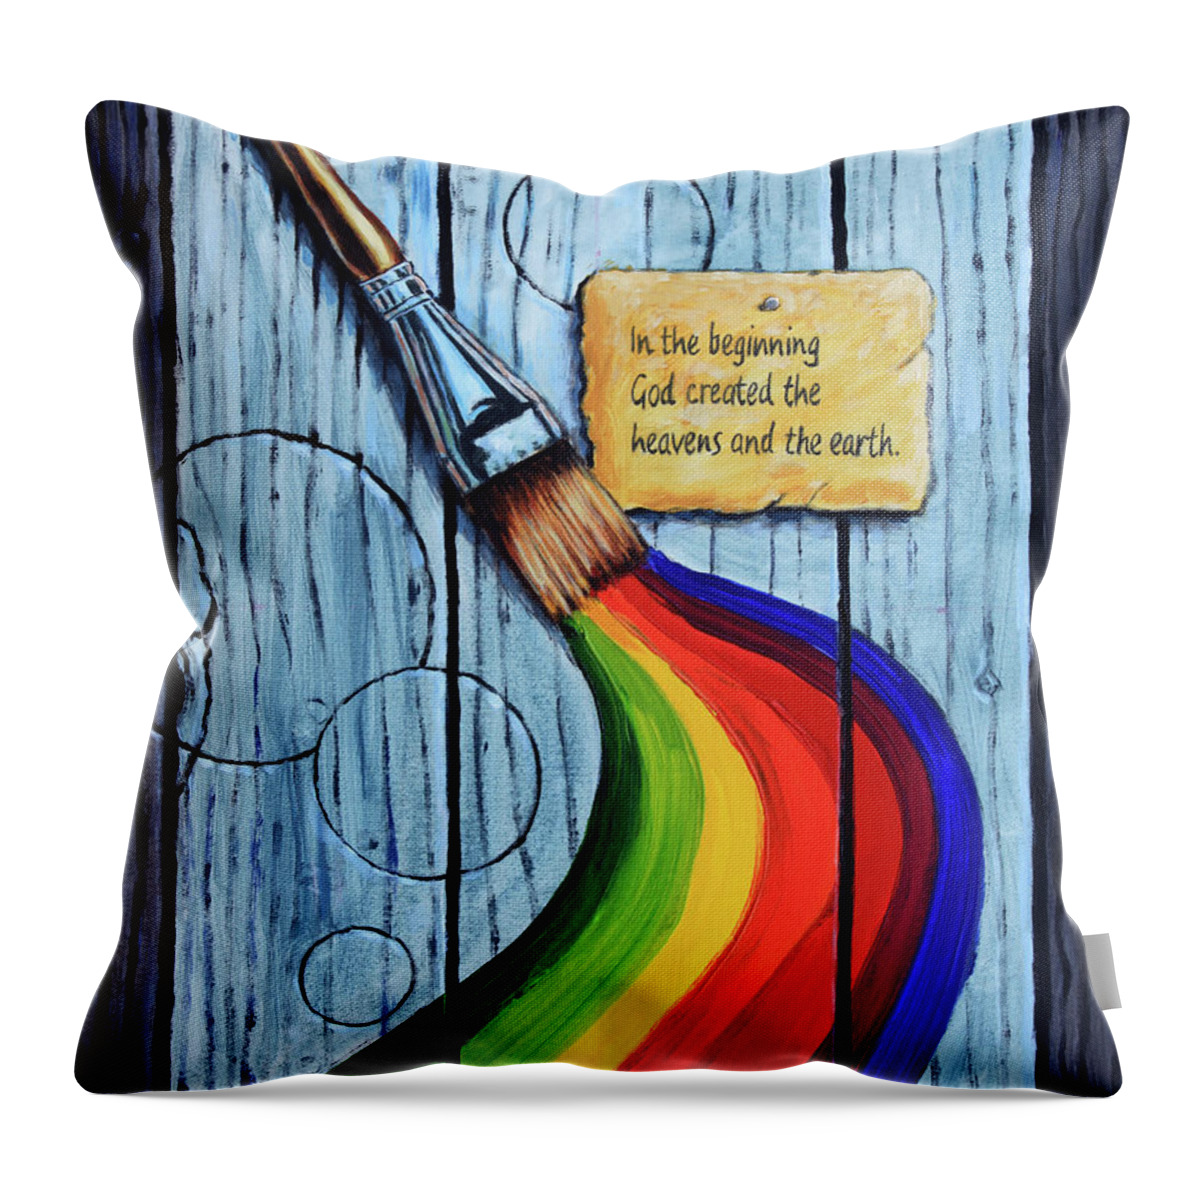 Still Life Throw Pillow featuring the painting In The Beginning by John Lautermilch